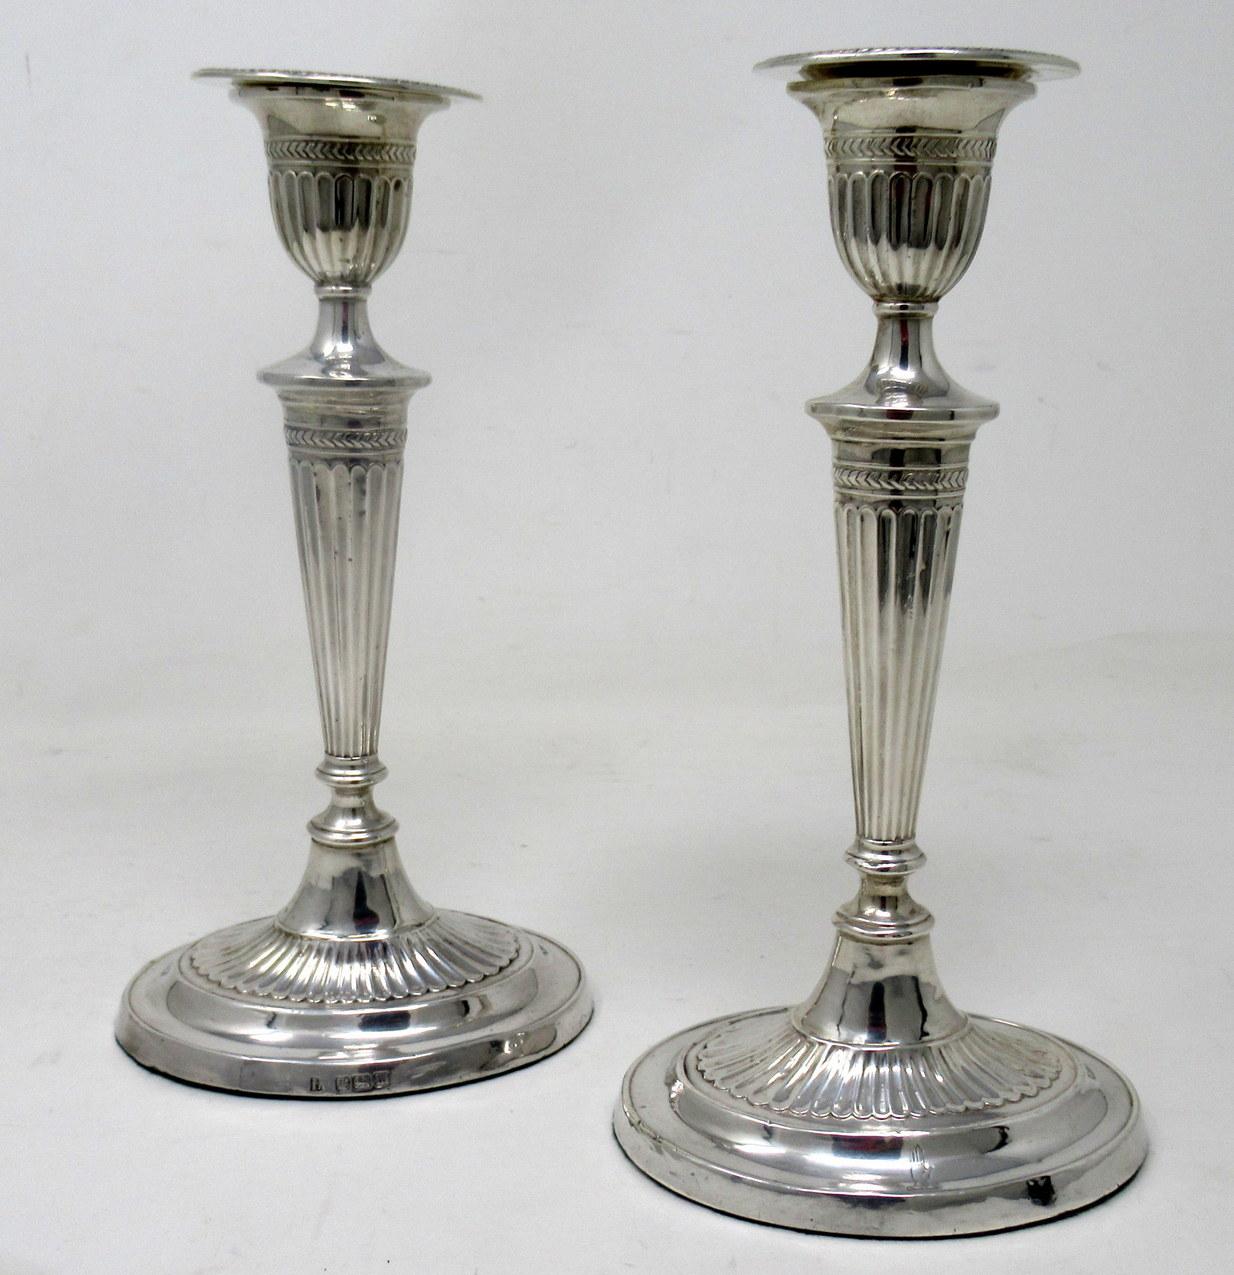 Stylish Pair of early Edwardian English Adams Style heavy gauge Sterling Silver Single Light Table Candlesticks of outstanding quality and compact proportions. 

Mark of Fordham & Faulkner. Orchard Works, Sheffield 

Sheffield Hallmark for 1905.